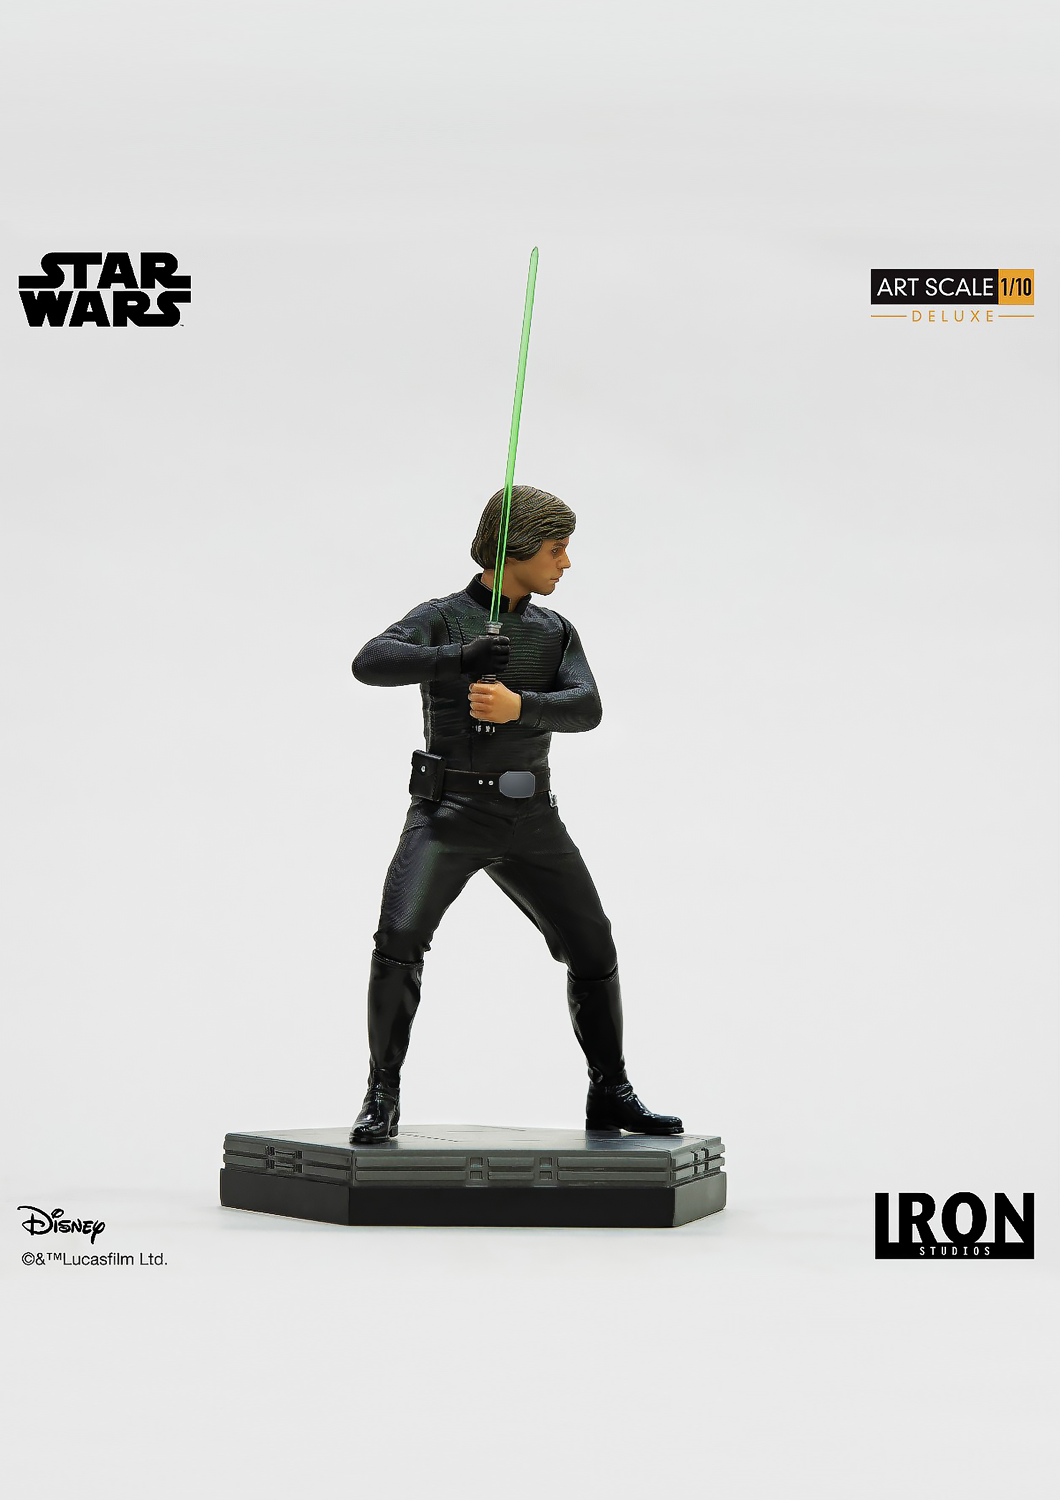 IRON STUDIOS STAR WARS LUKE SKYWALKER DELUXE ART SCALE 1/10 UCSWR21019-10 - Anotoys Collectibles